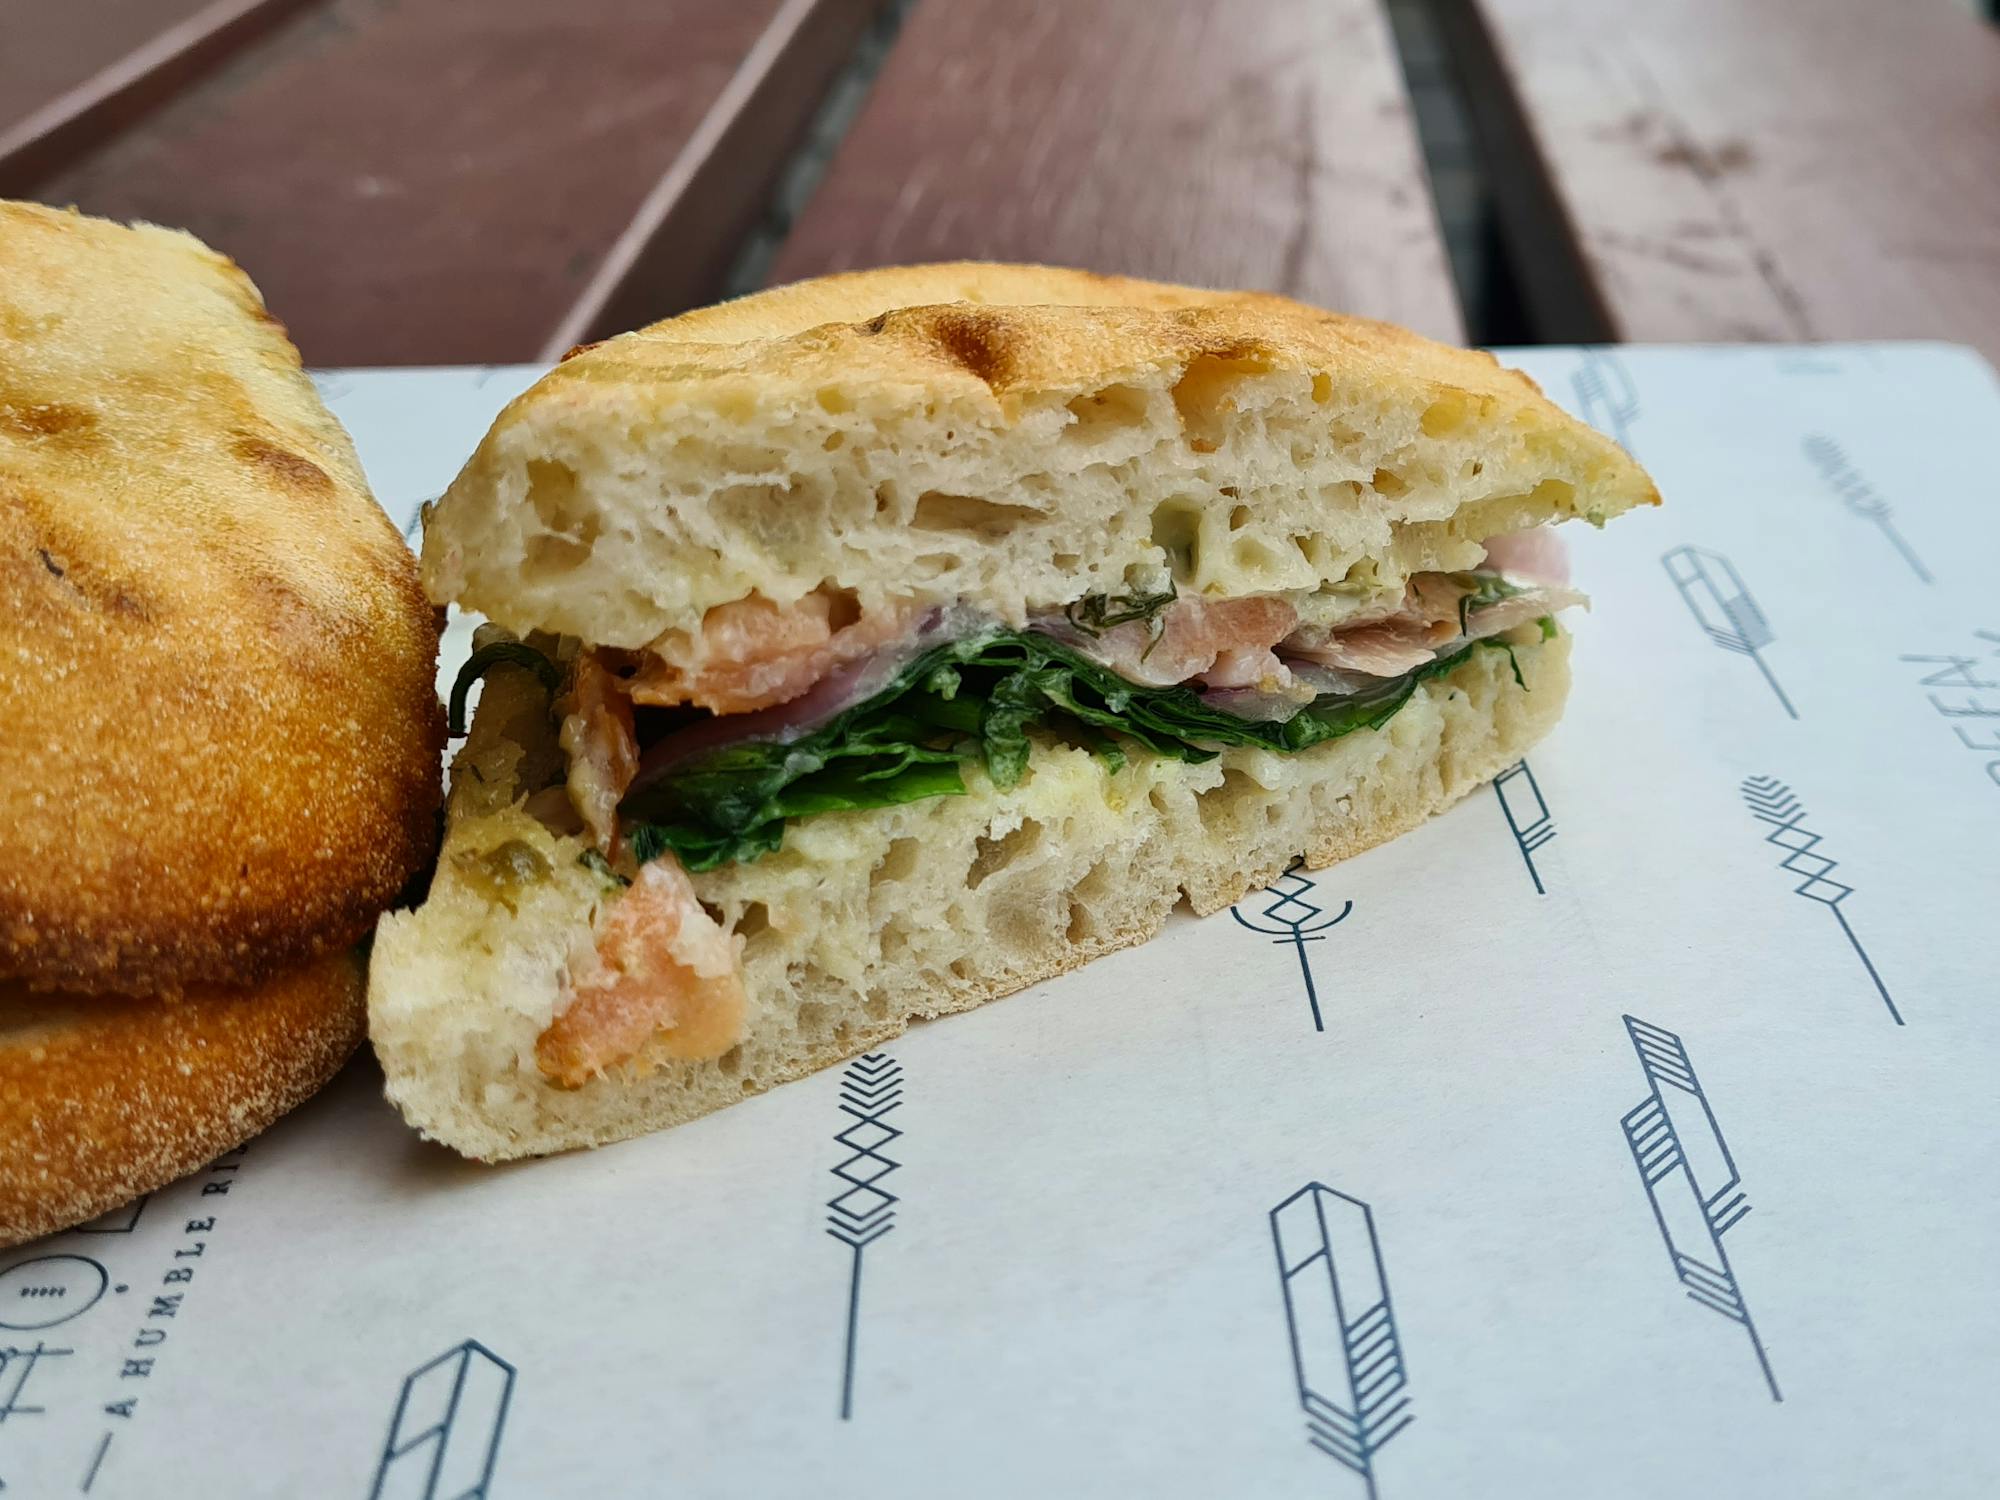 Salmon and spinach in a focaccia, sitting on top of branded paper packaging